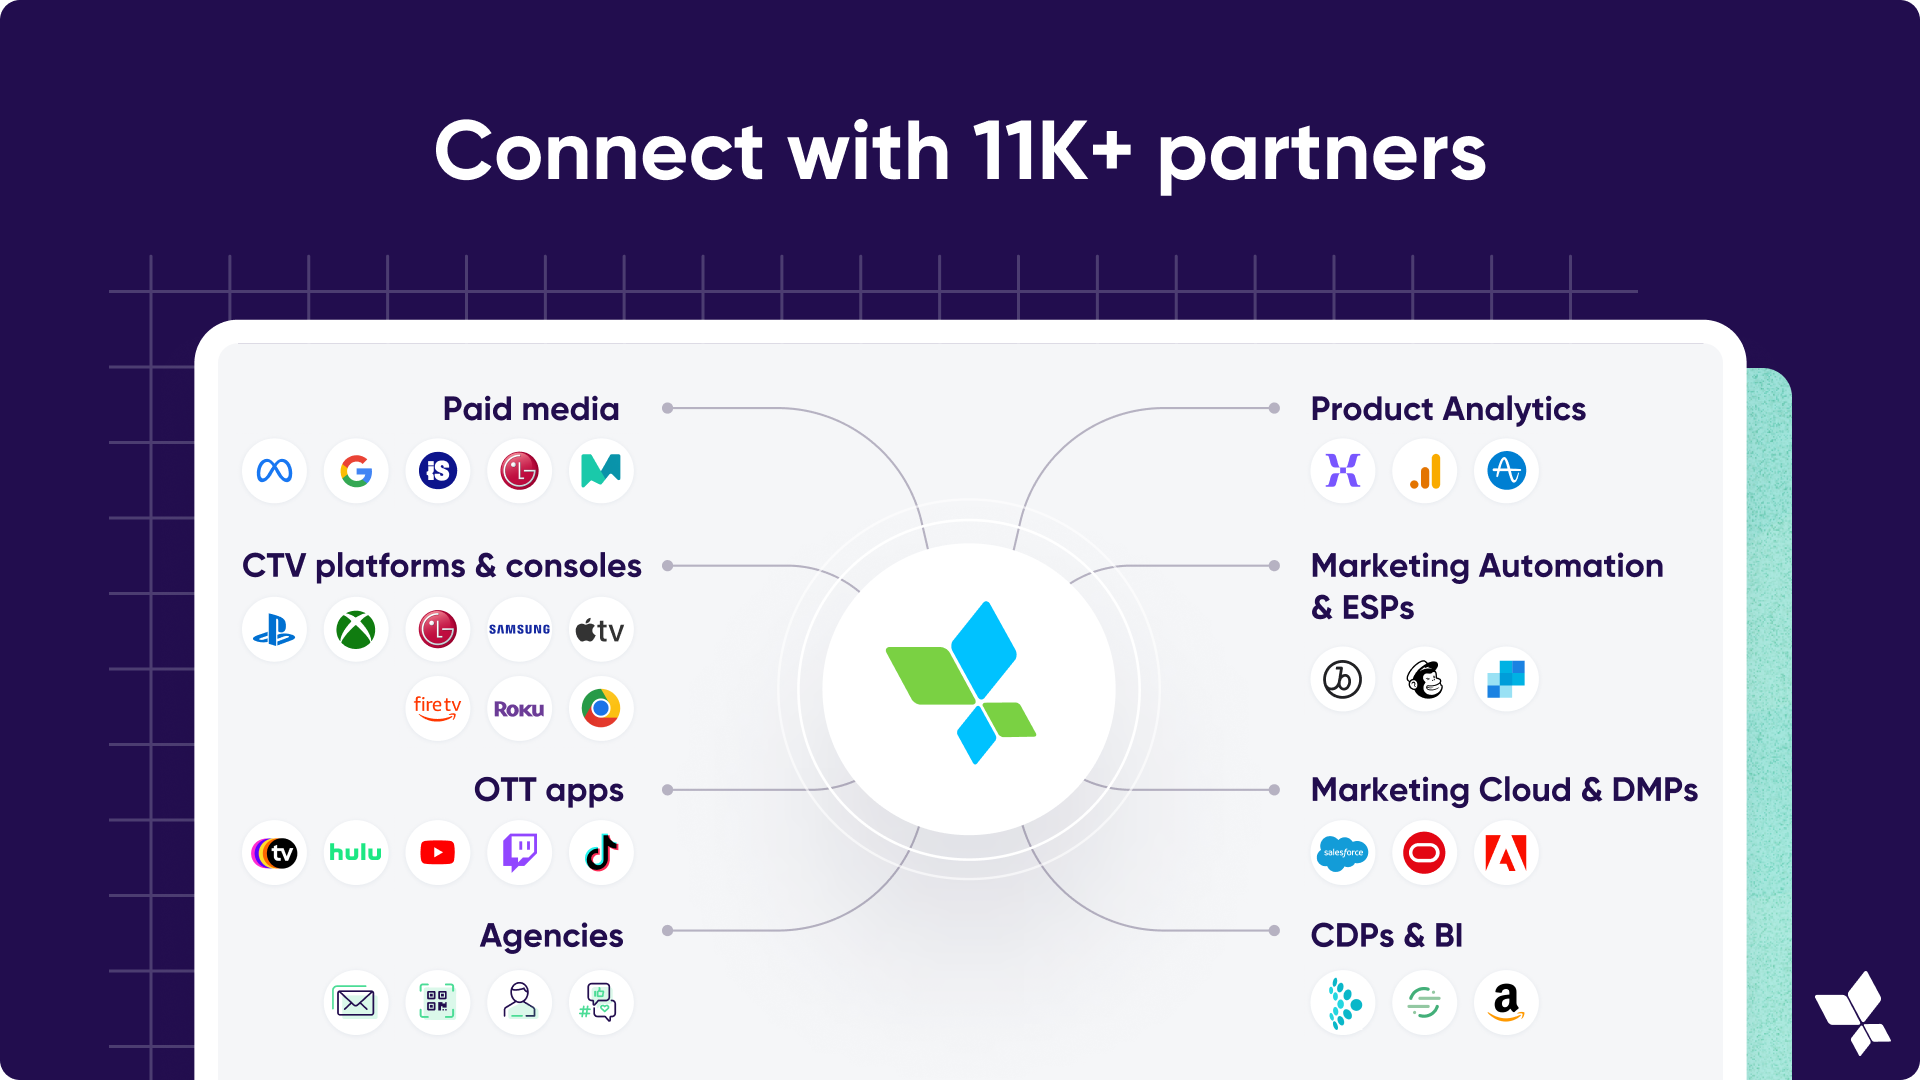 Connect with 11K+ partners